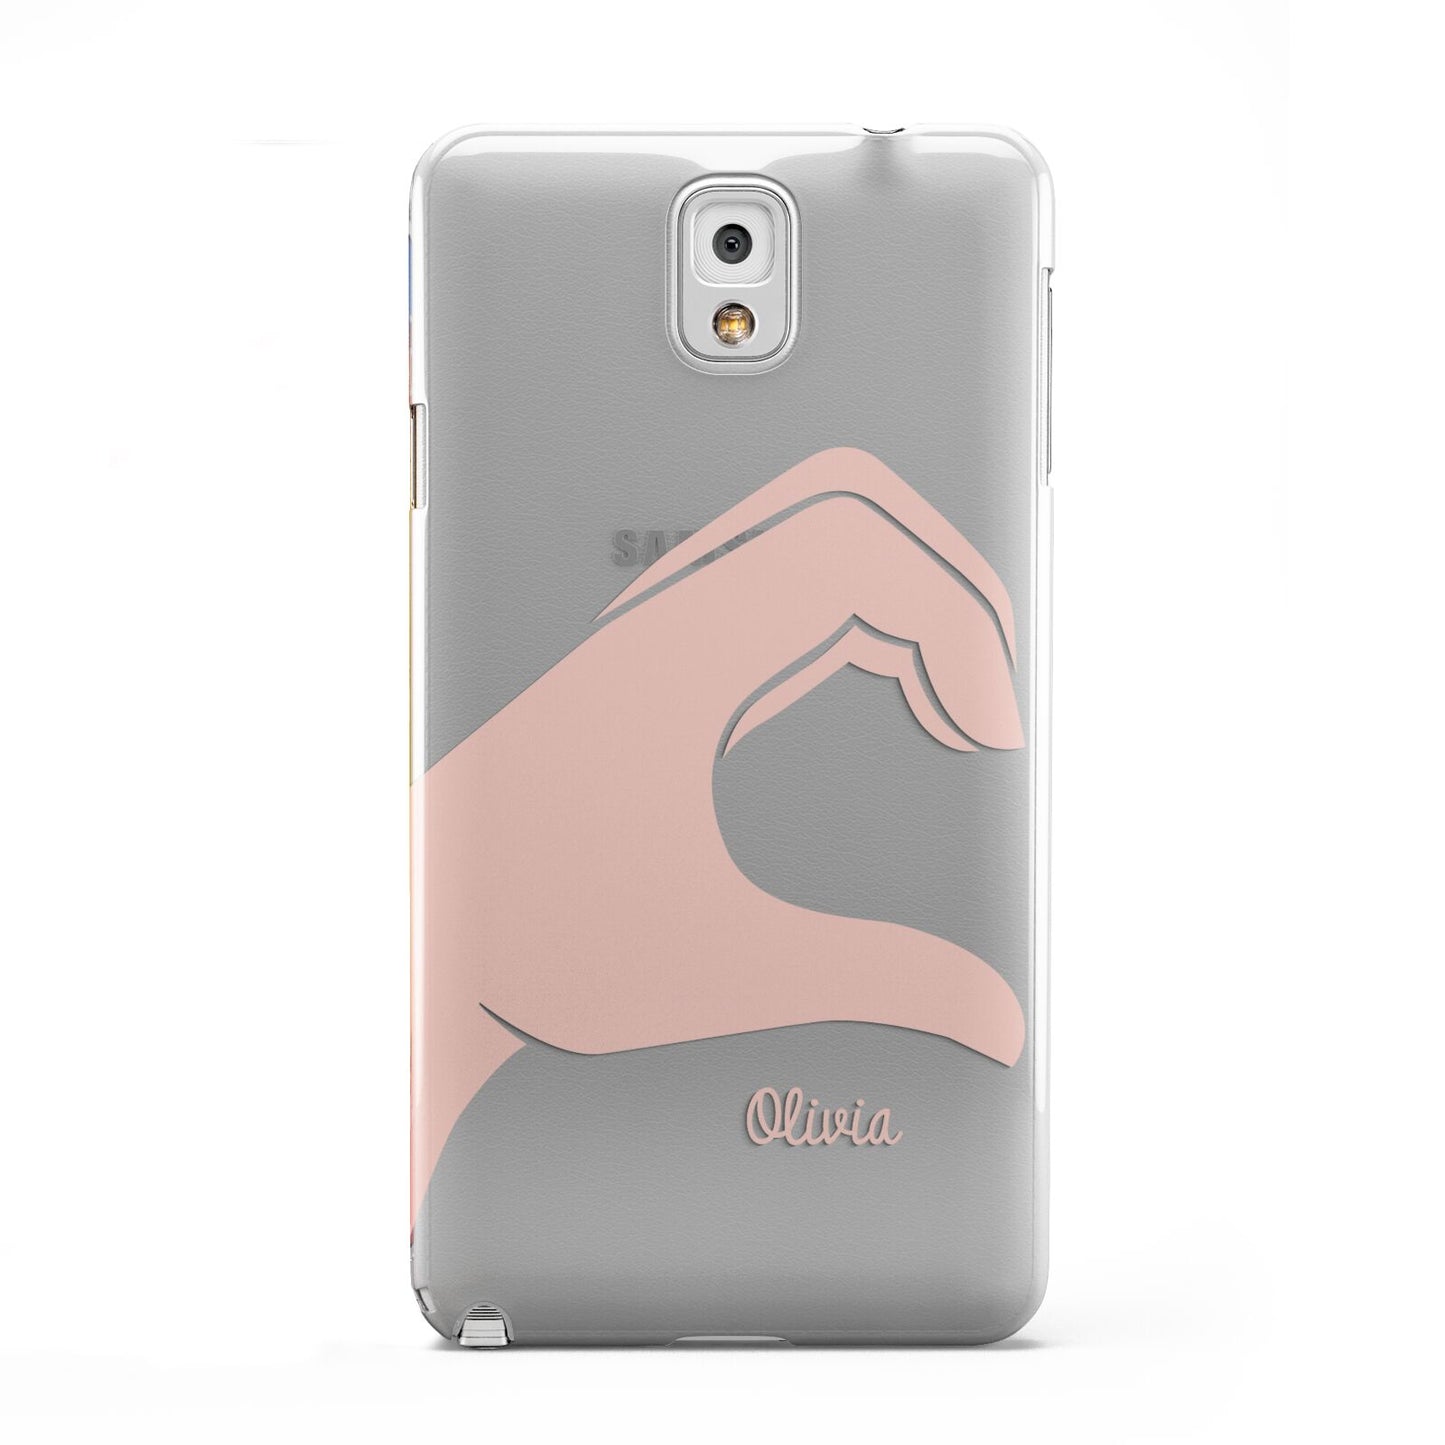 Left Hand in Half Heart with Name Samsung Galaxy Note 3 Case